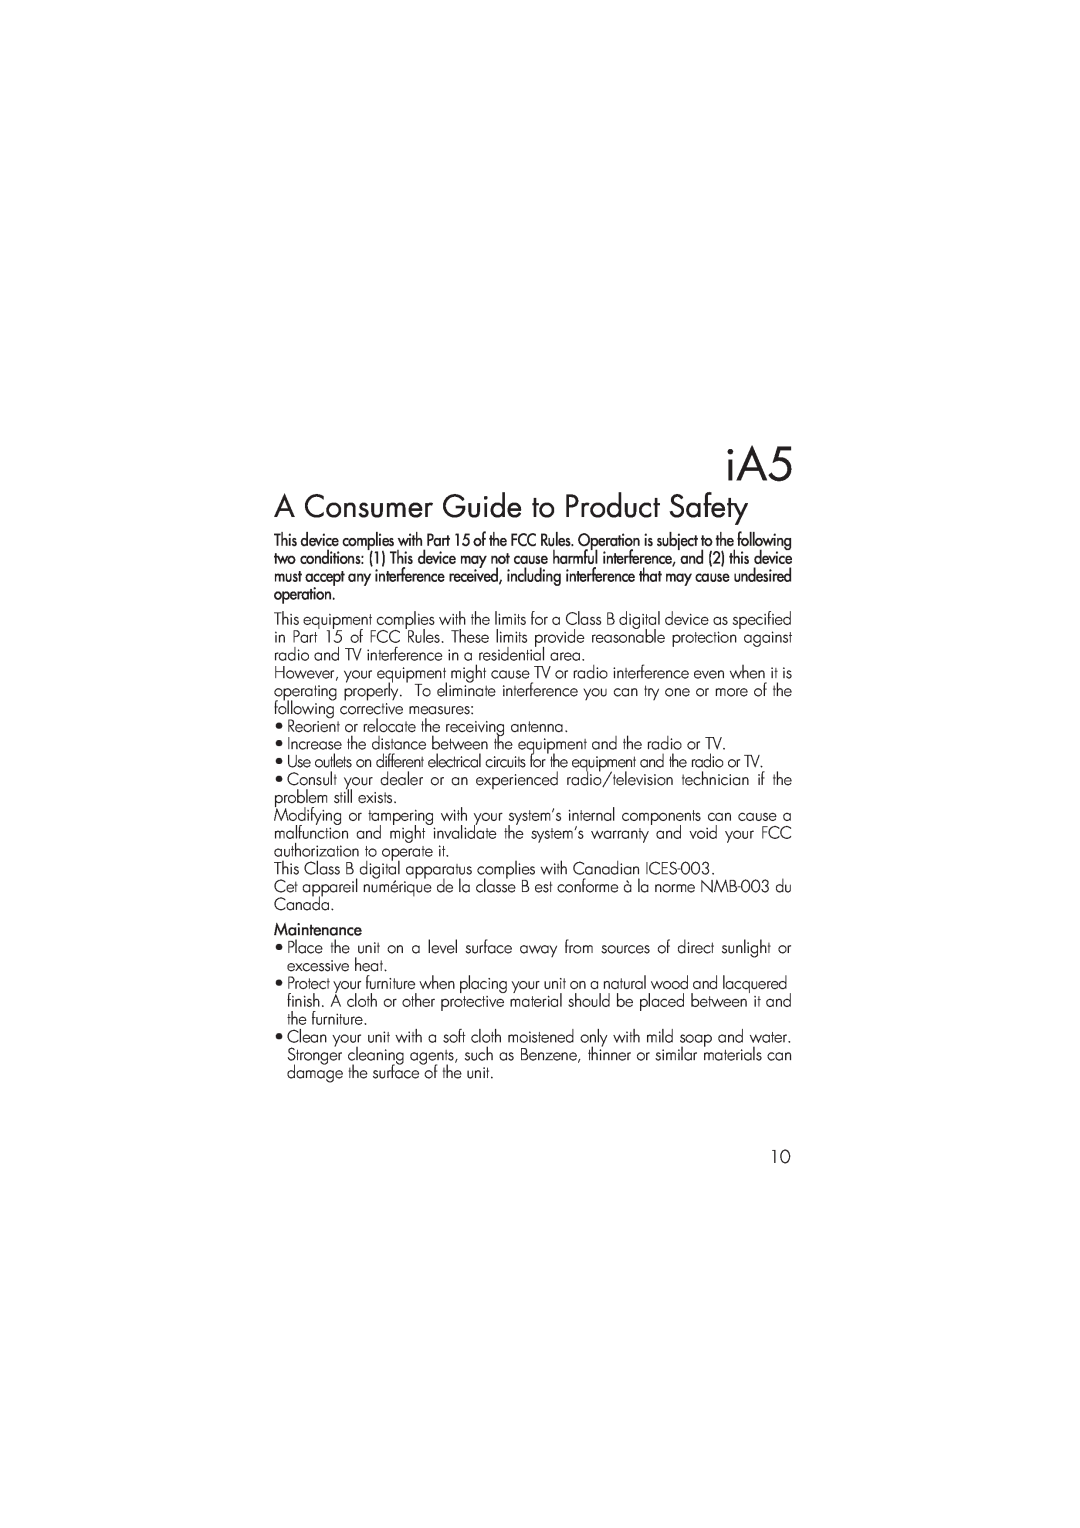 iHome ia5 instruction manual A Consumer Guide to Product Safety 